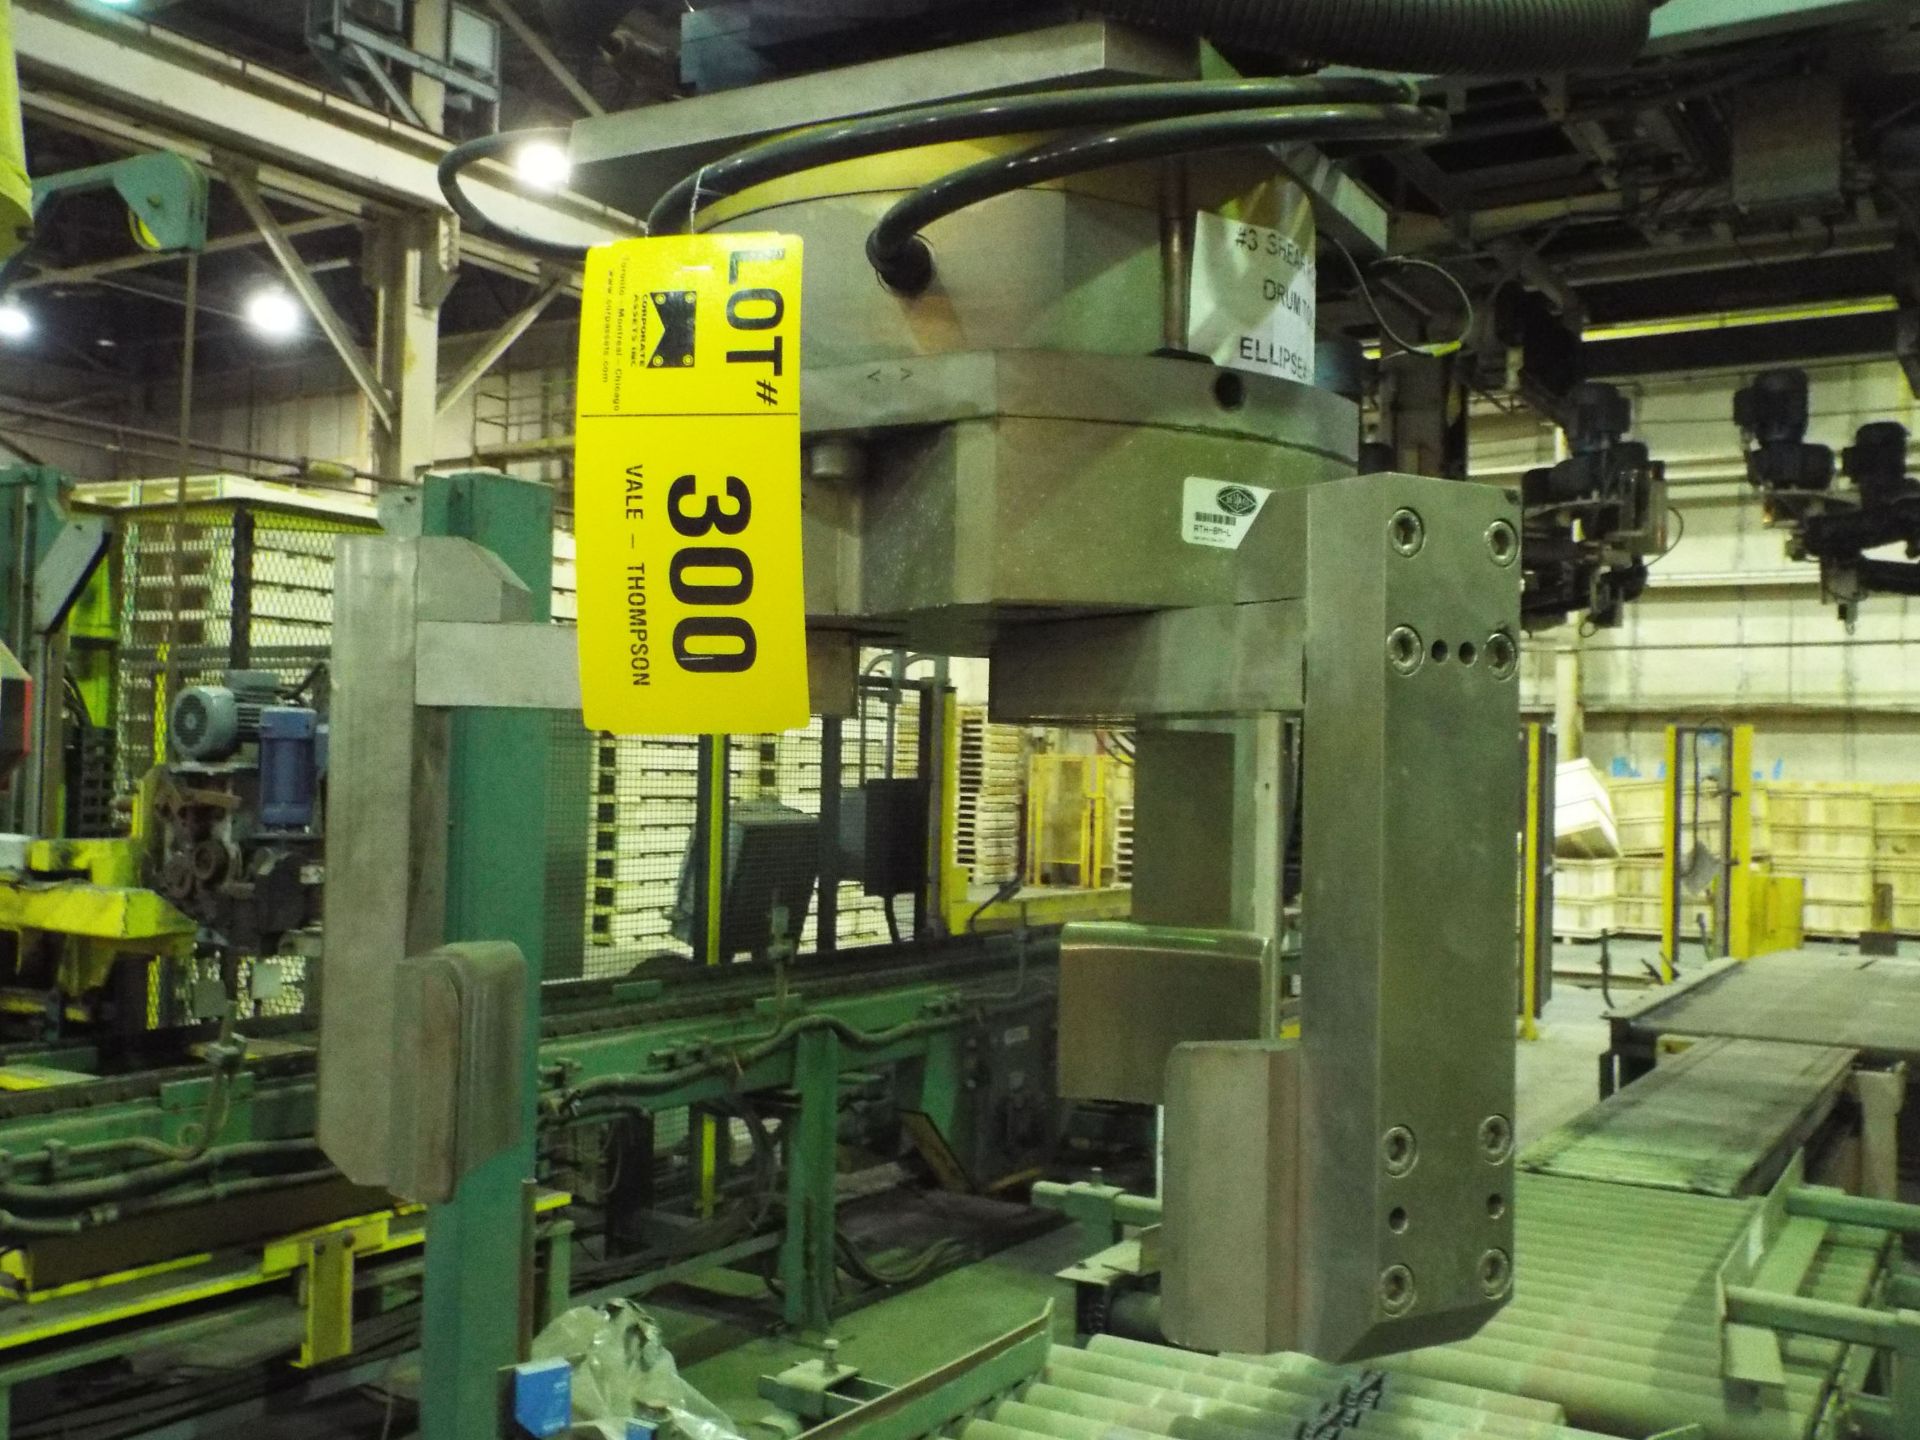 LOT/ FANUC M-900iA 6 AXIS PICK AND PLACE ROBOT WITH DRUM PICKING HEAD, ROBOT TOOL CHANGE STATION, - Image 3 of 8